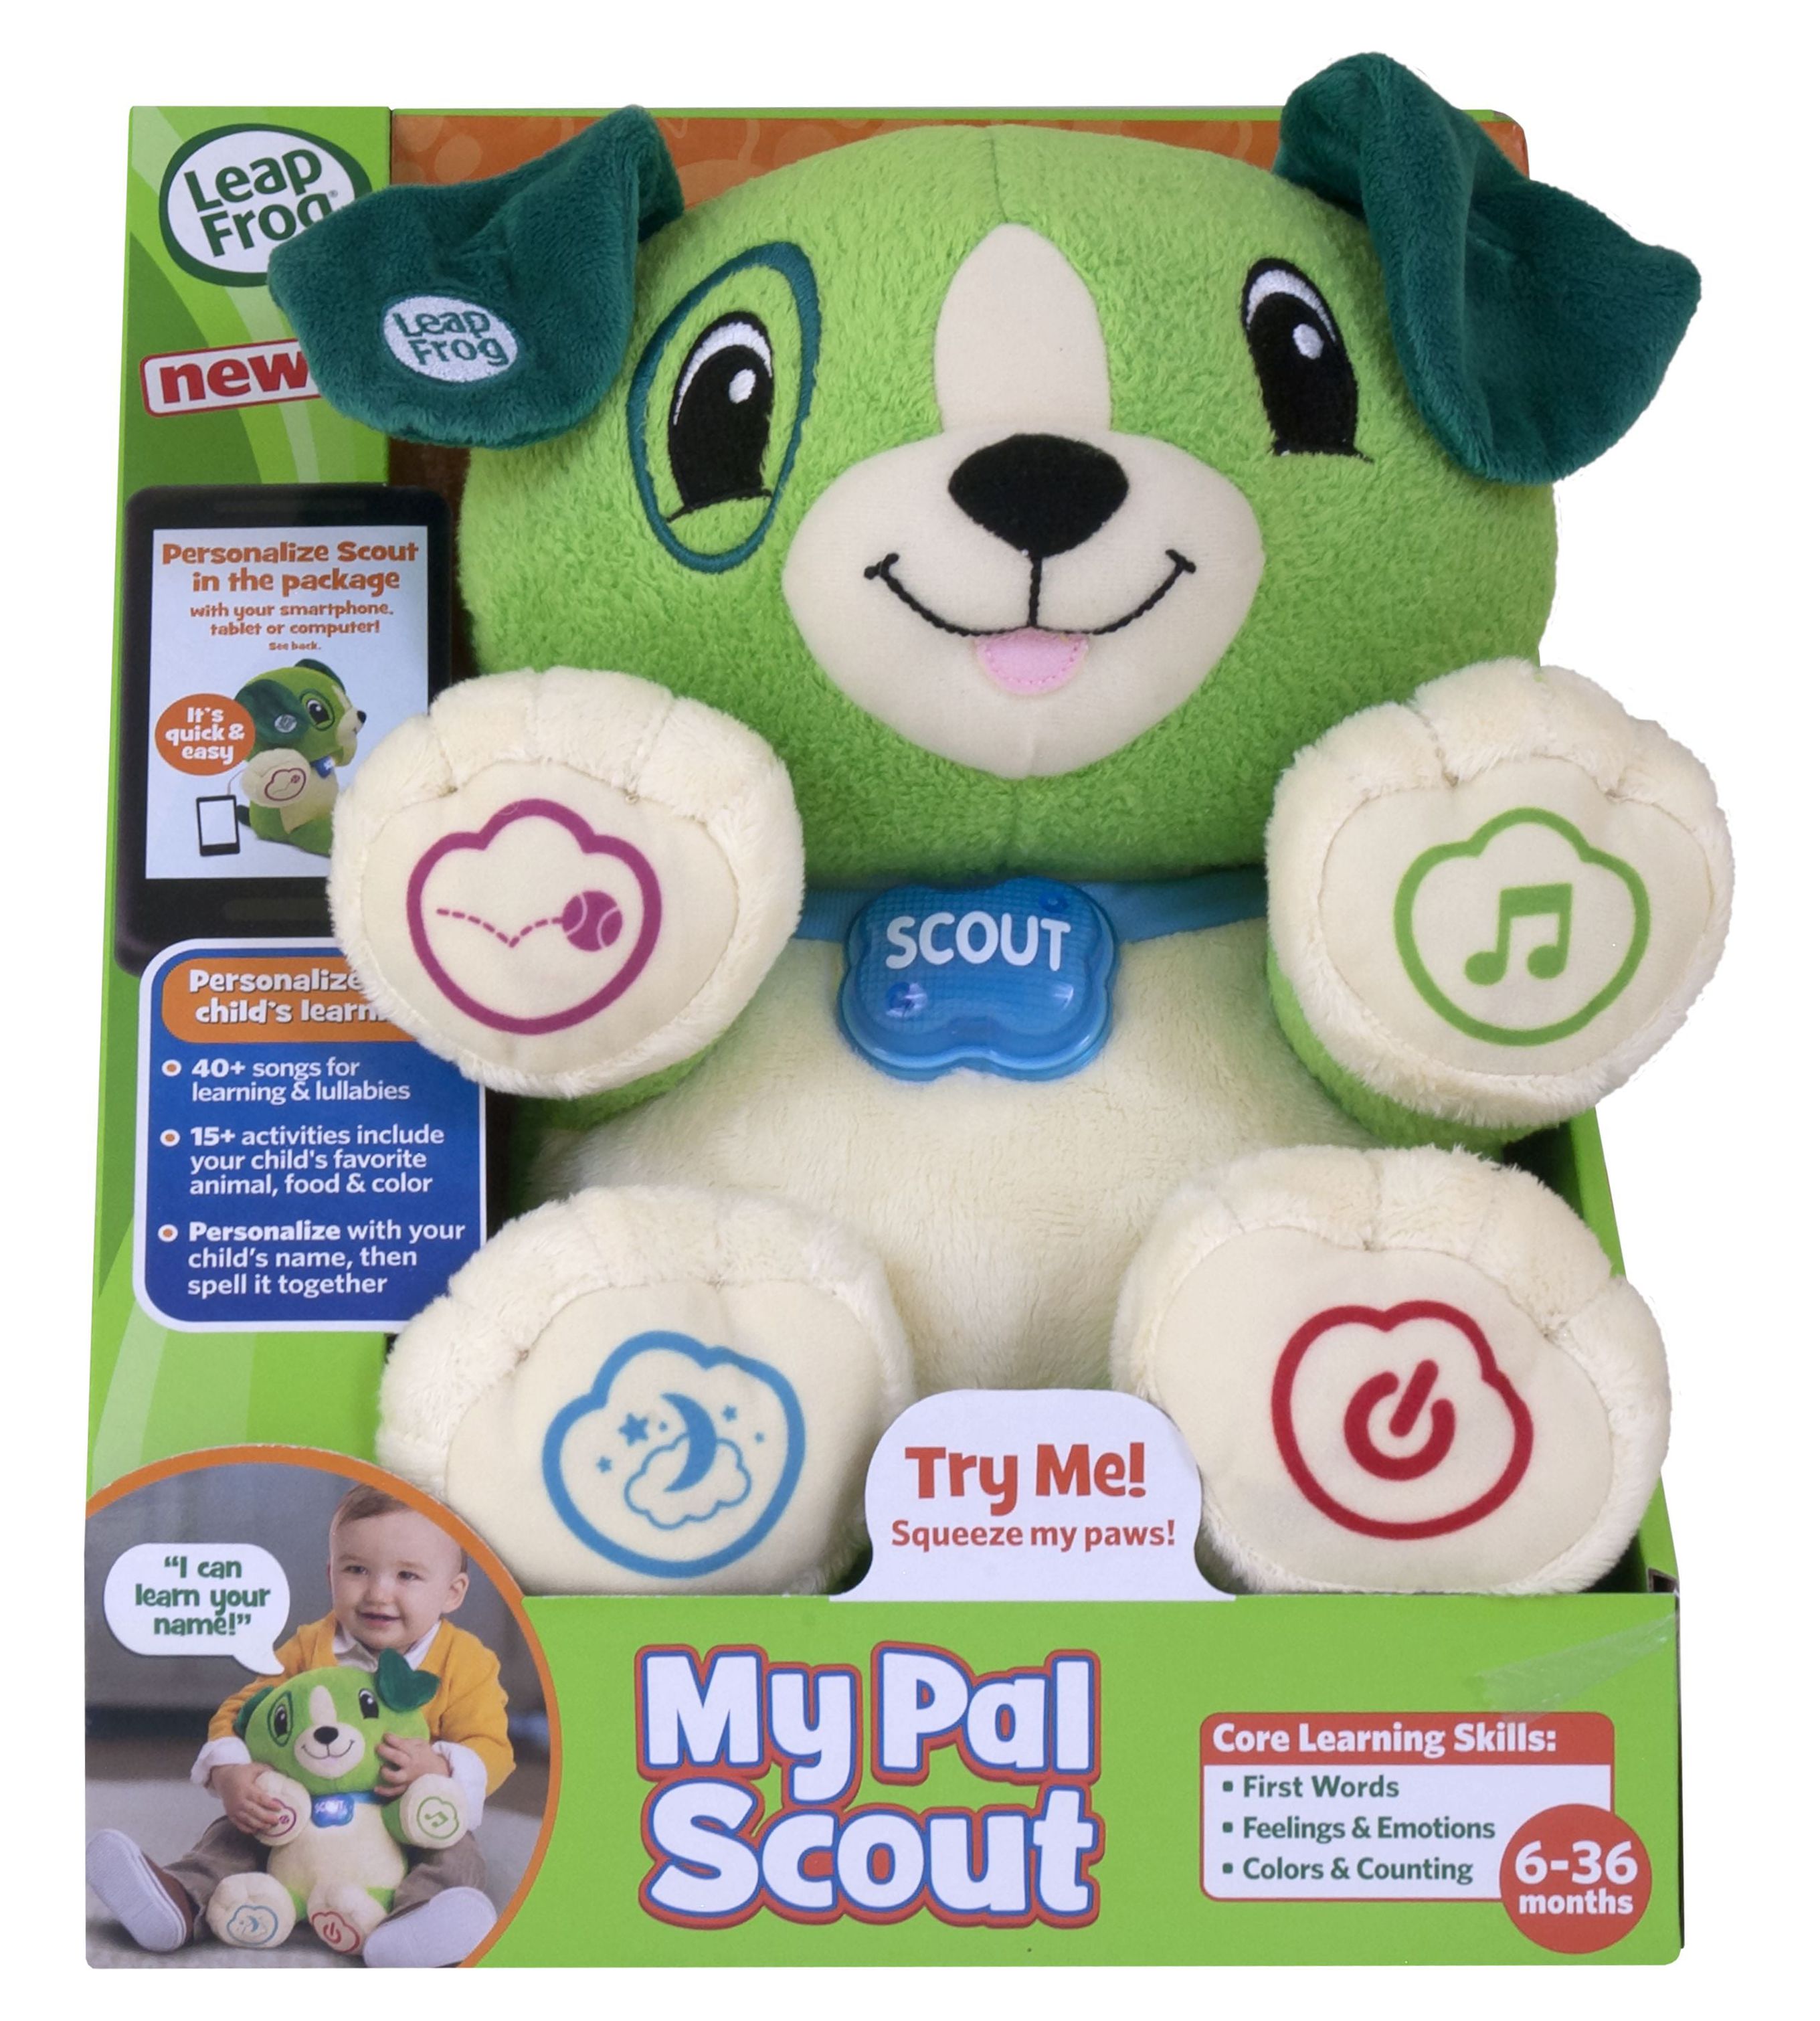 LeapFrog, My Pal Scout, Plush Puppy, Baby Learning Toy - image 4 of 12